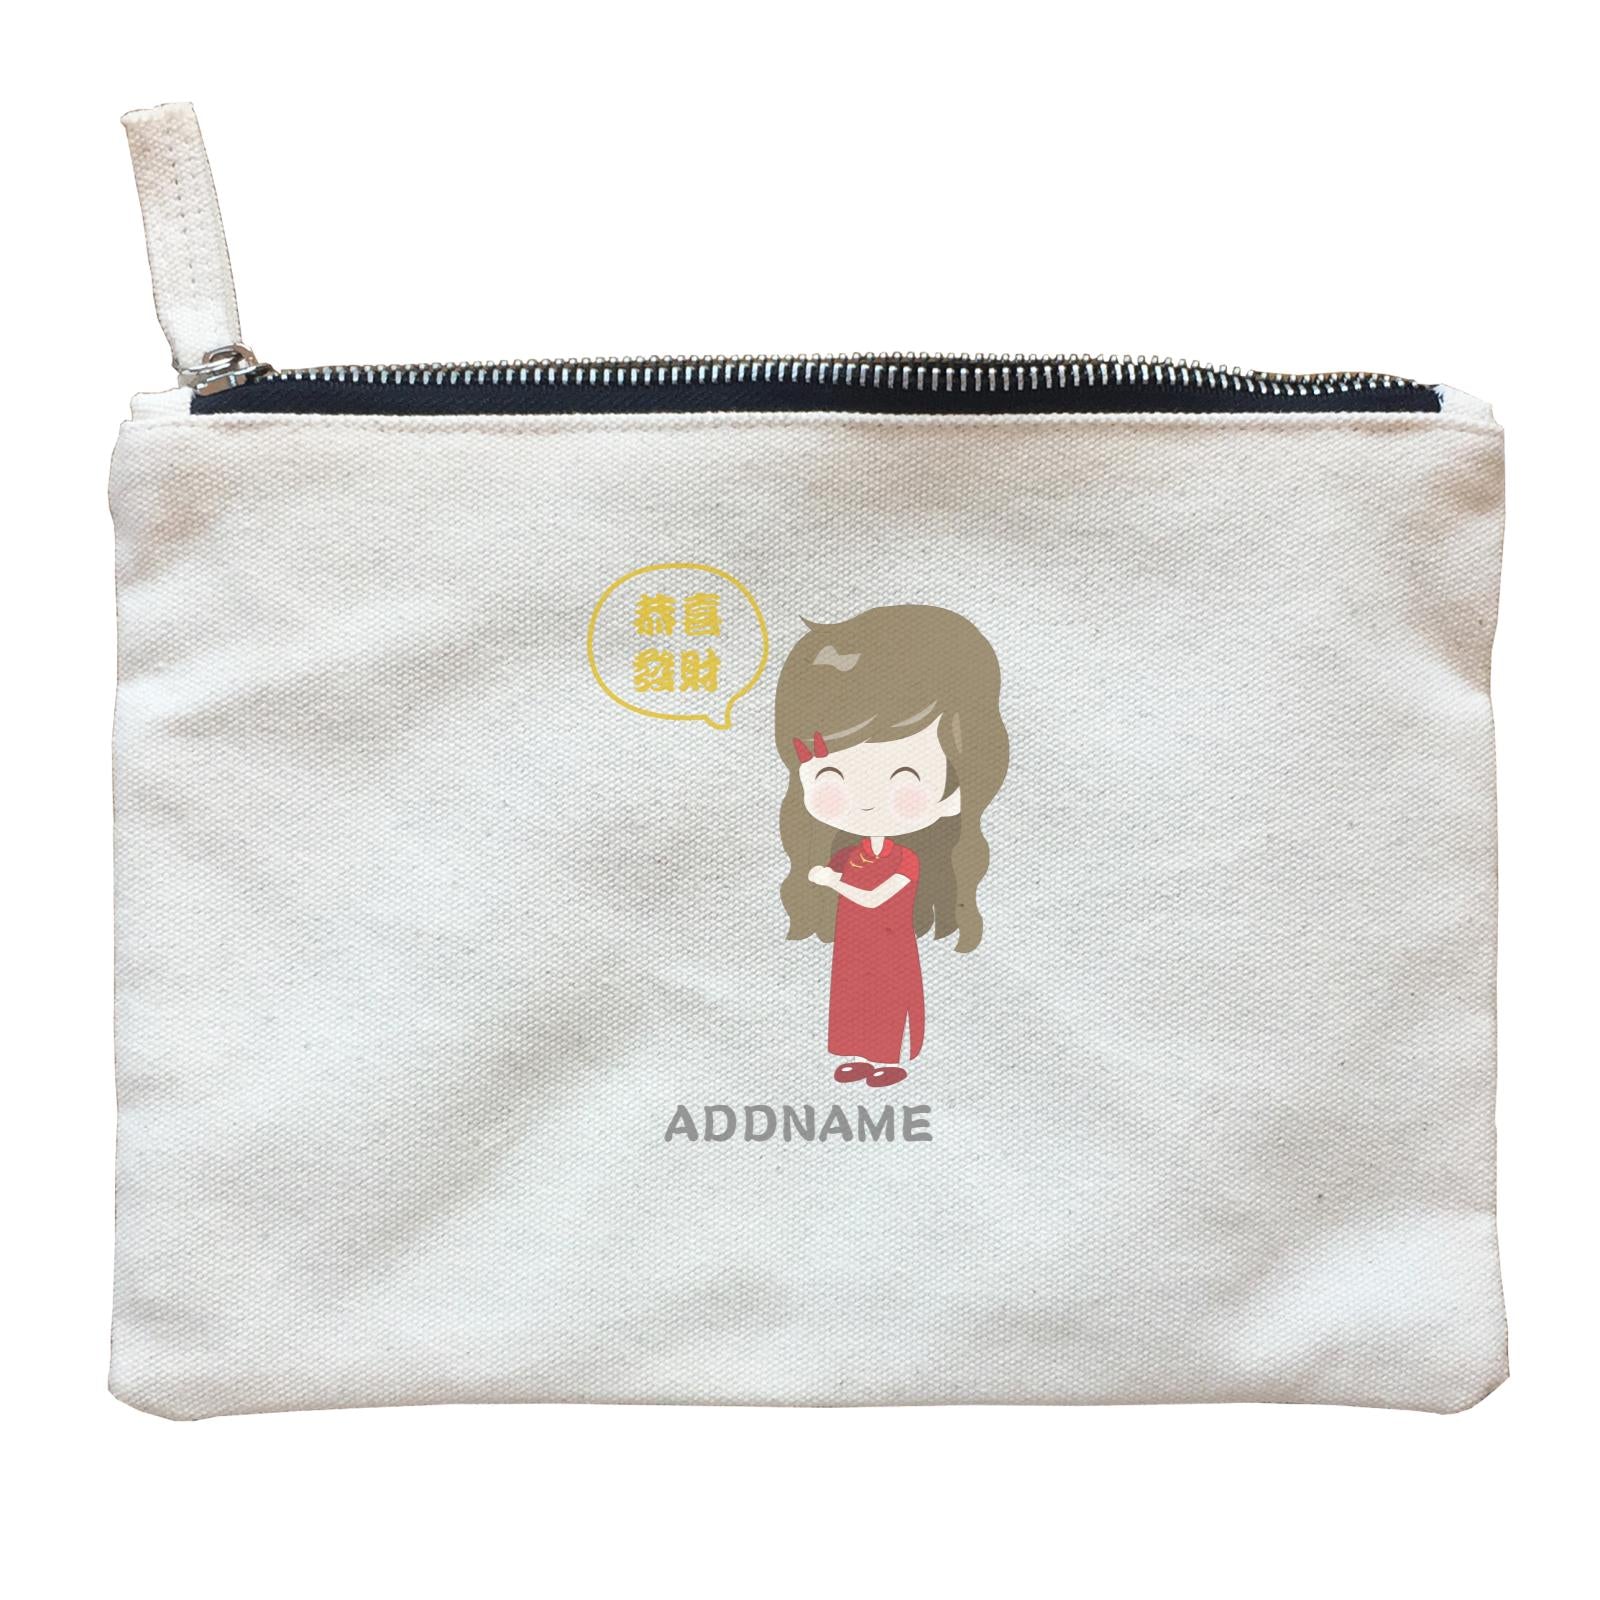 Chinese New Year Family Gong Xi Fai Cai Mommy Addname Zipper Pouch